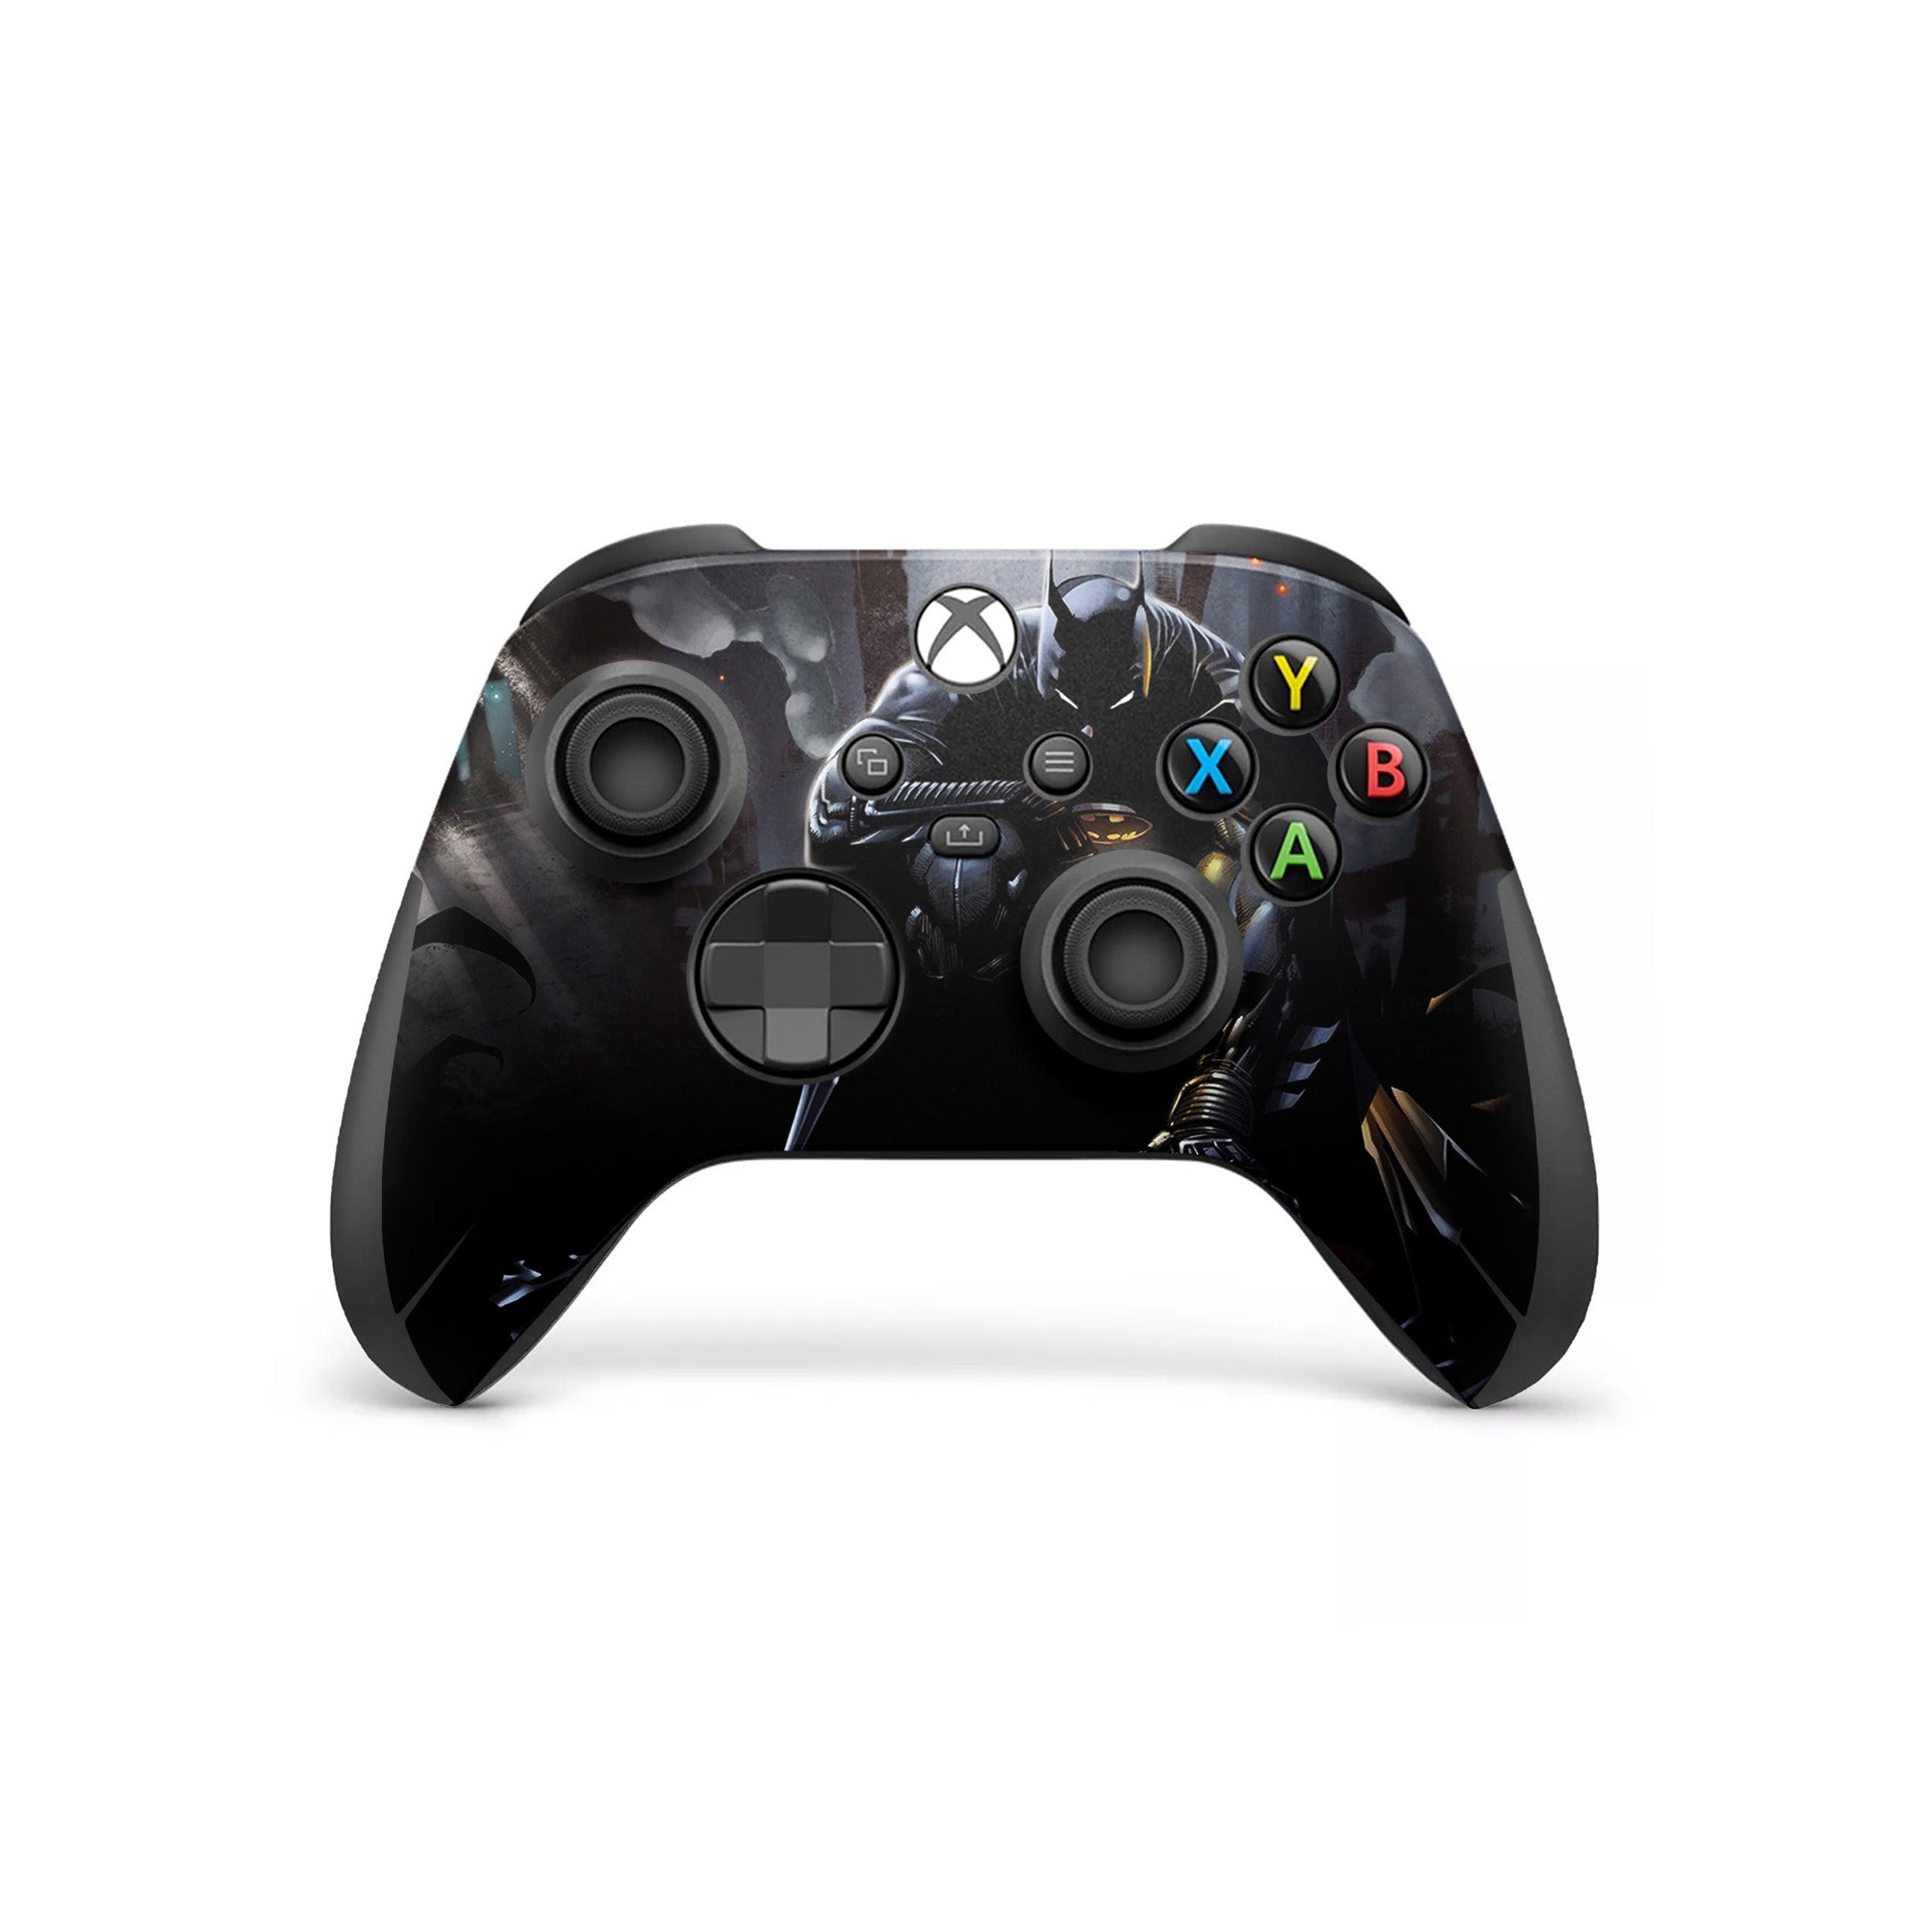 A video game skin featuring a DC Comics Batman design for the Xbox Wireless Controller.